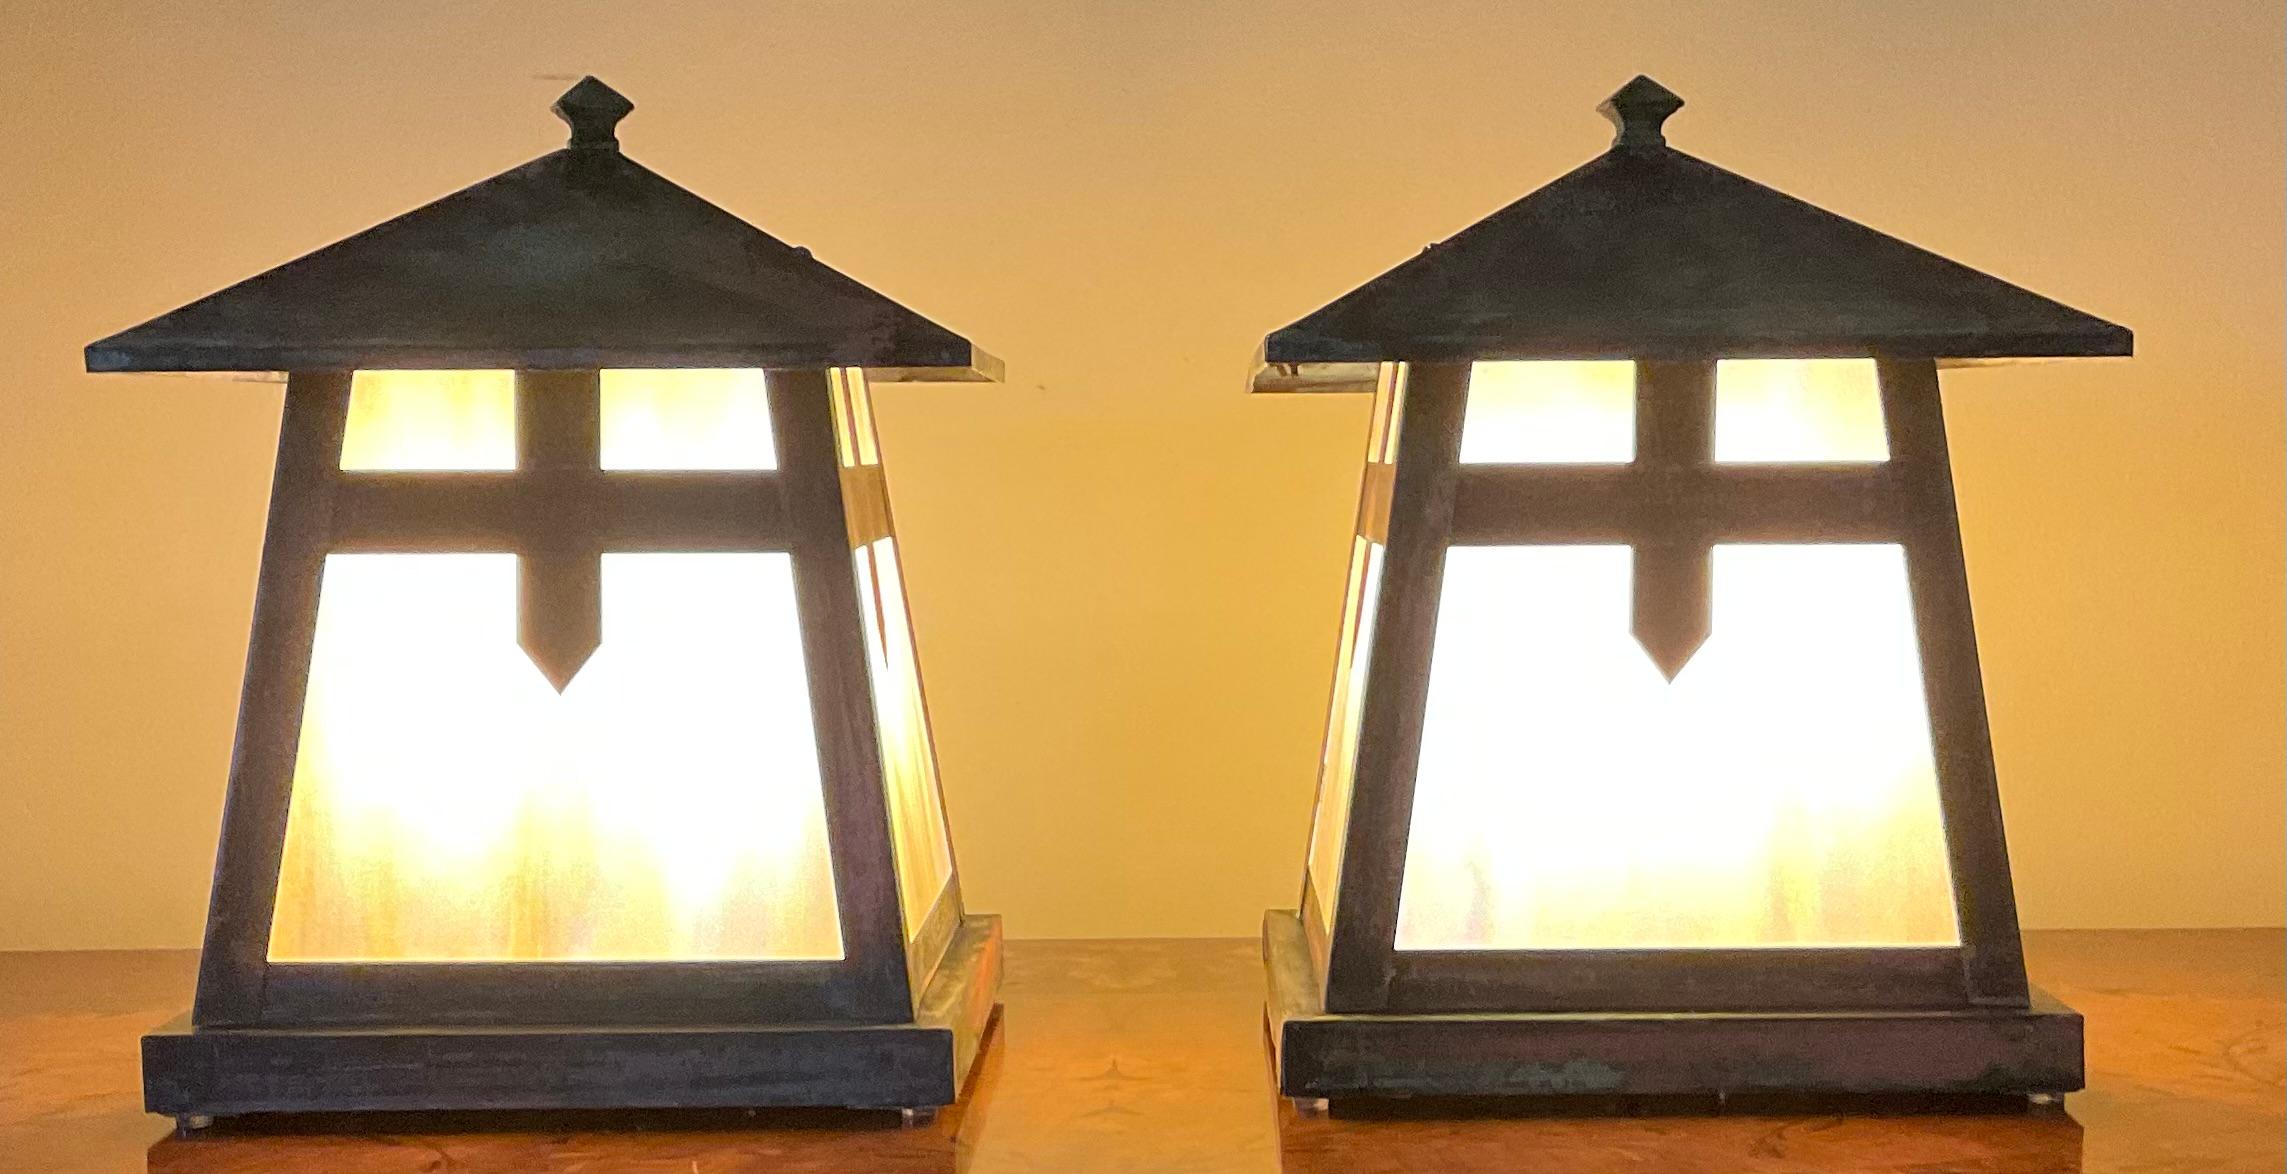 Beautiful pair of table lamps made of solid copper decorated with art glass on four sides , newly electrified with one 60/watt light each lamp.
This pair originally was post lantern for the entrance of a house , and professionally converted to